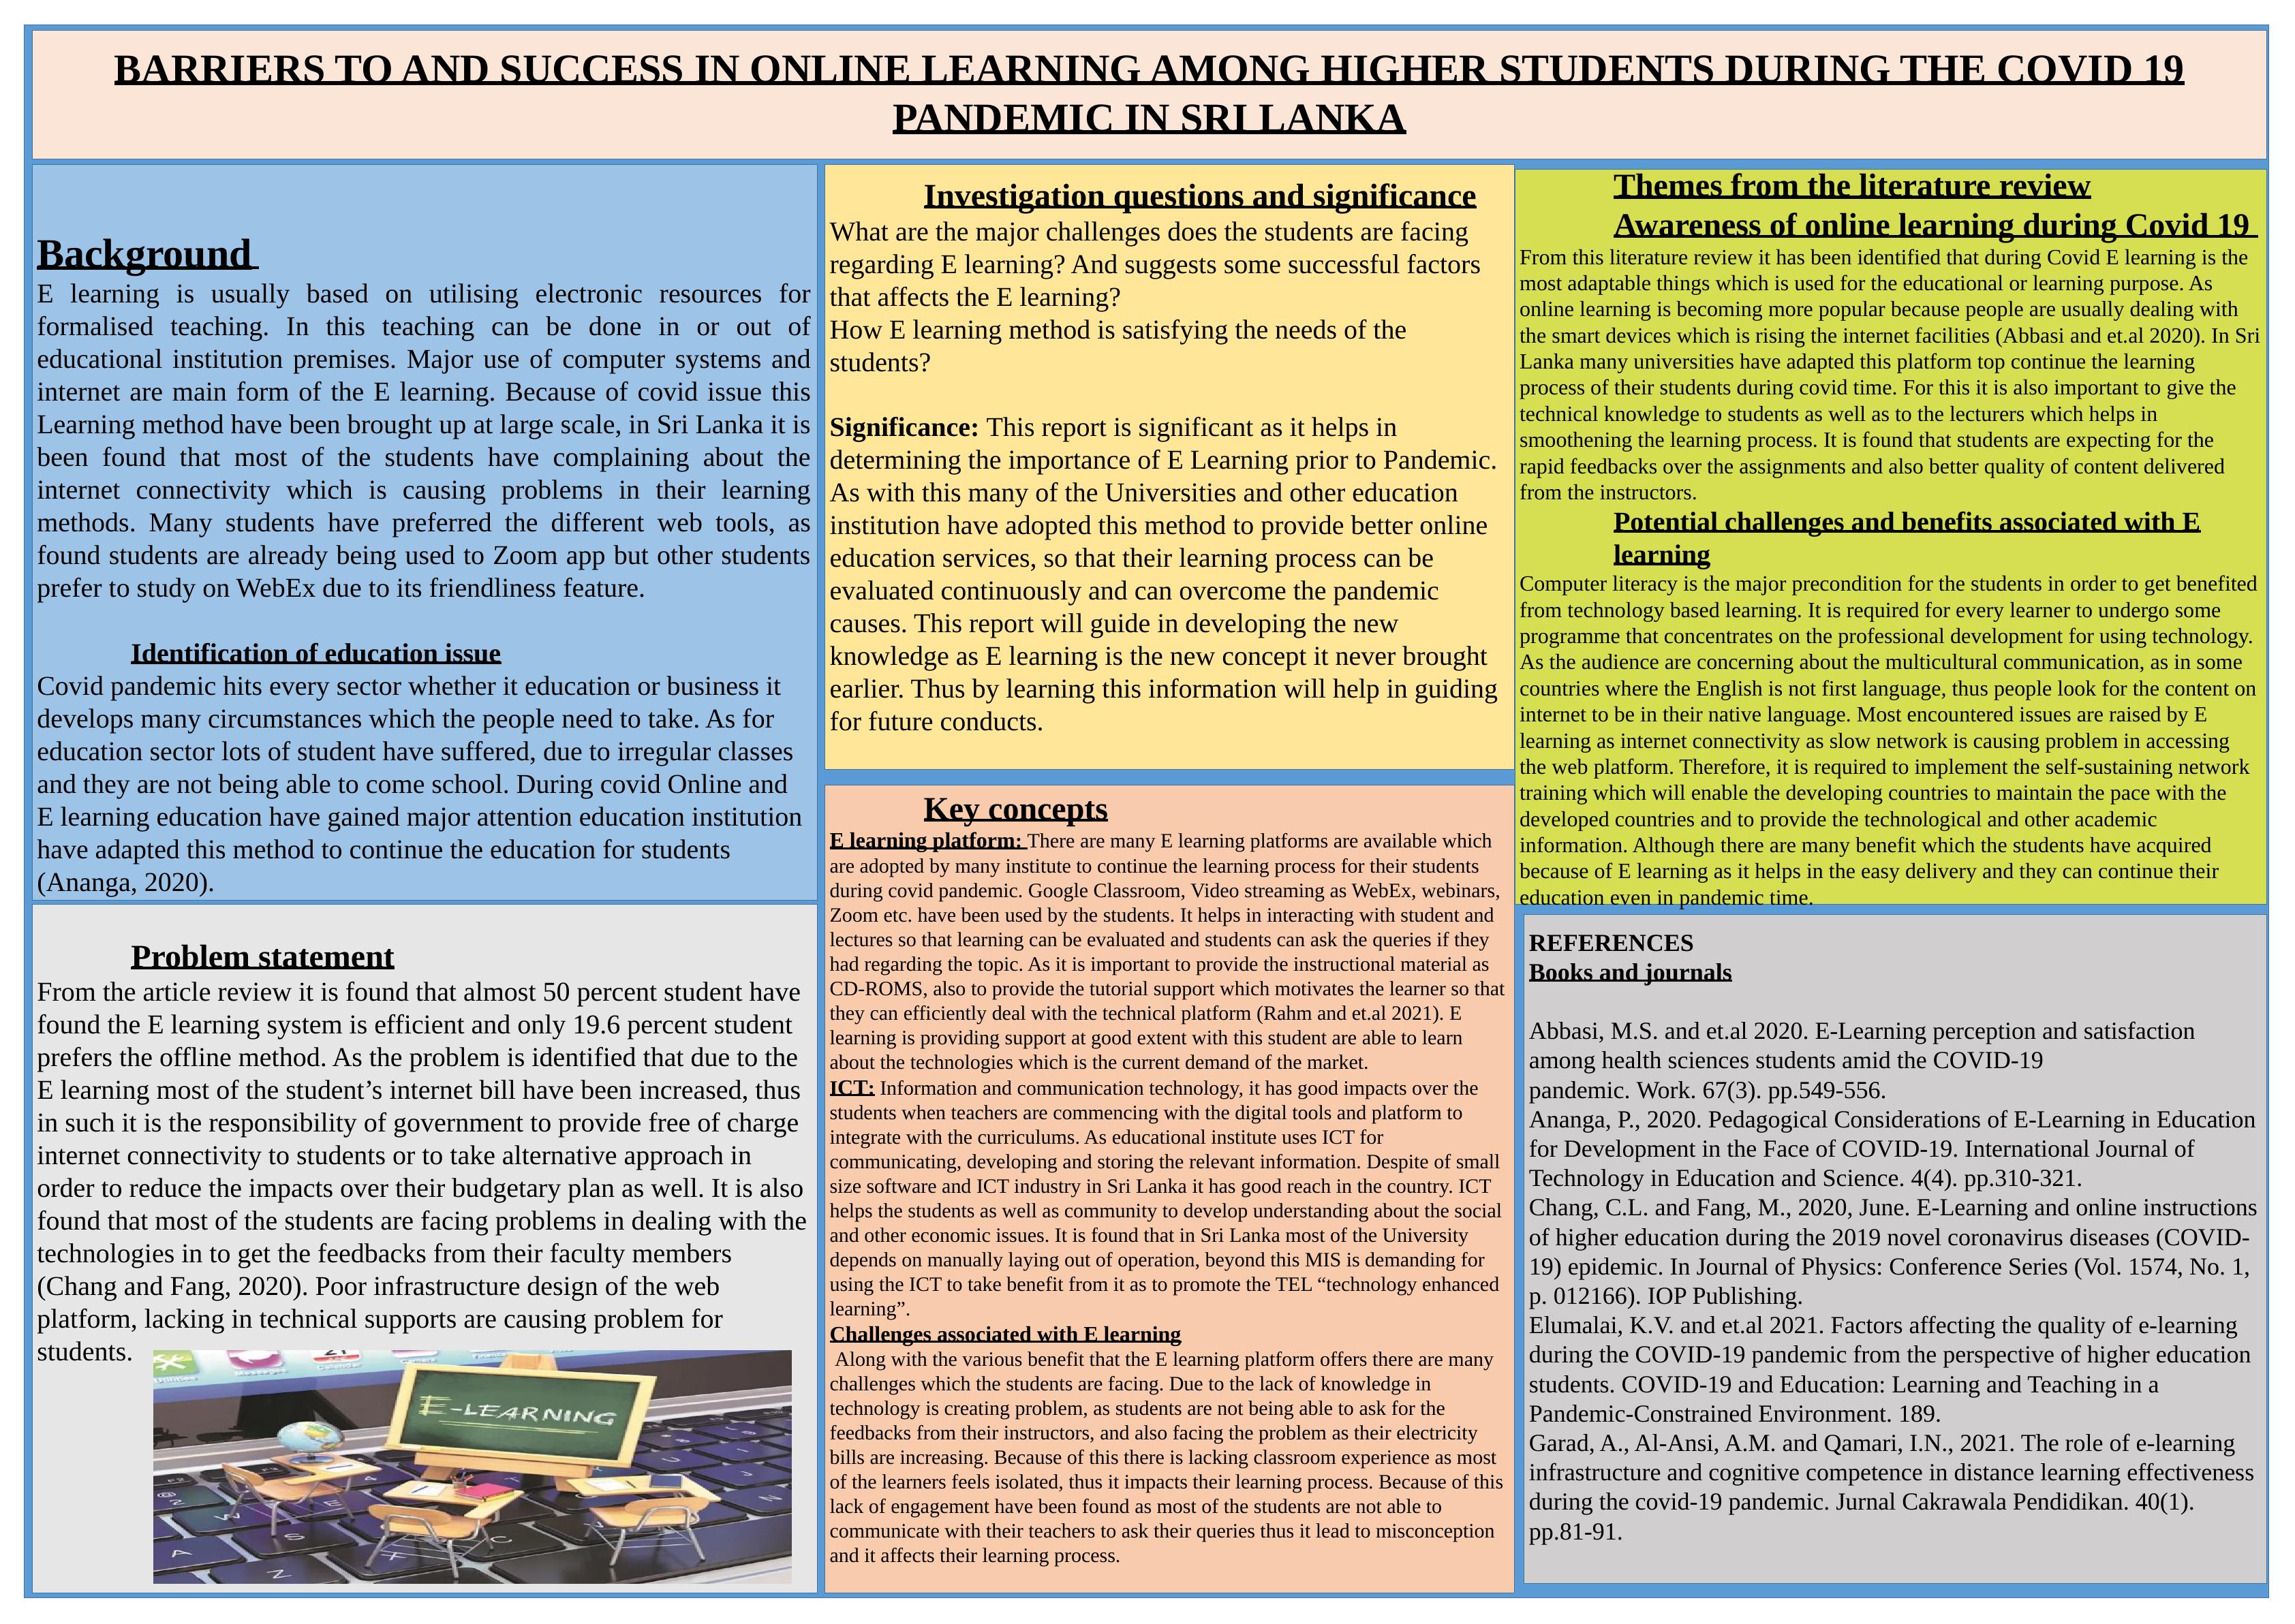 Barriers and Success in Online Learning for Higher Students in Sri Lanka during Covid-19 Pandemic_1